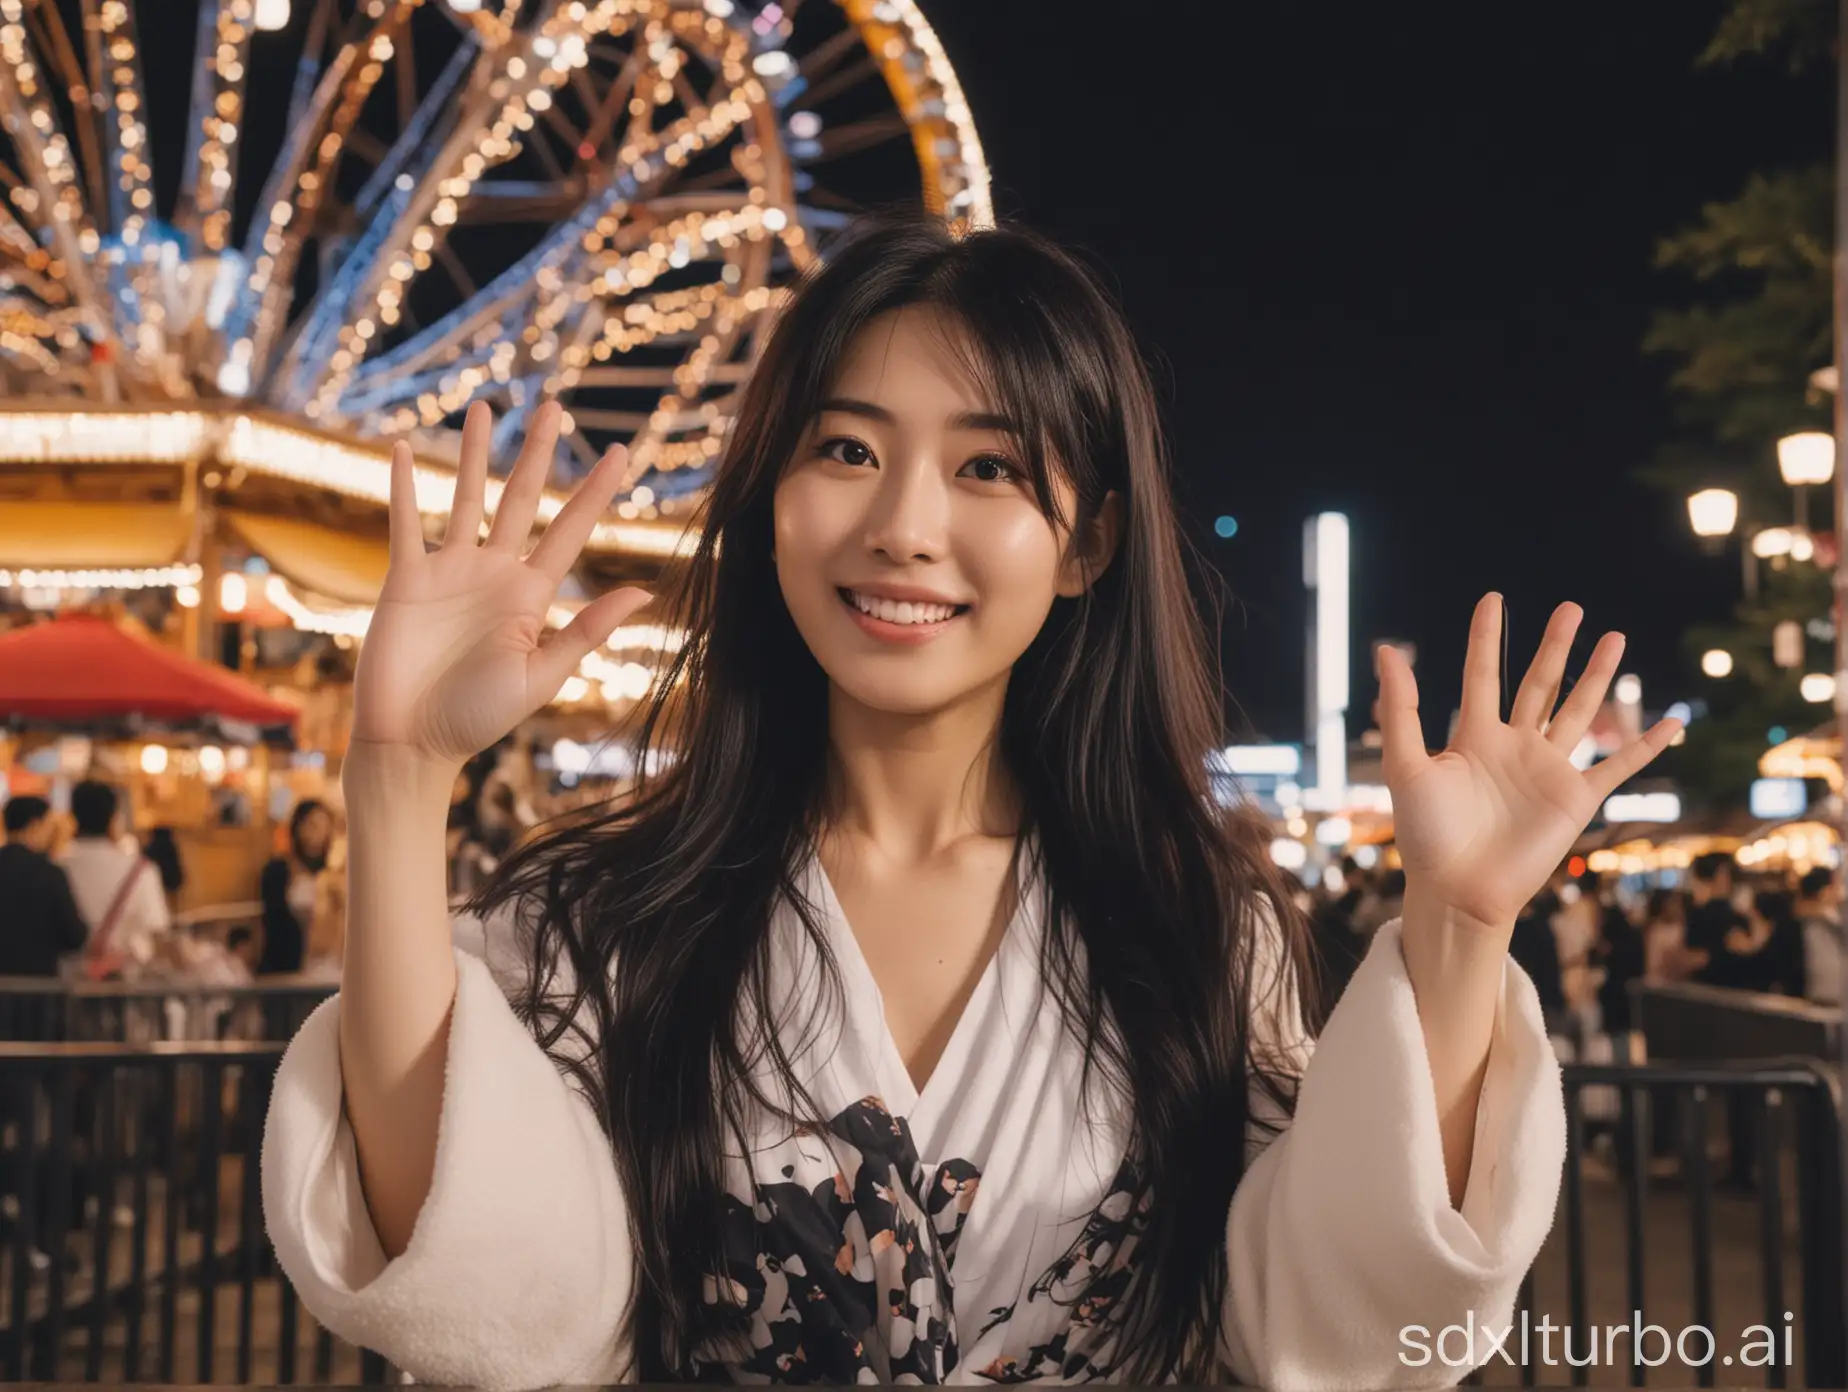 beautiful intellectual typical Japanese 33-year-old girl is having fun in an amusement park at night, waving her hands, Instagram model, long black hair, warm, height 6.5 feets, female, masterpiece, 4k, correct fingers or hands